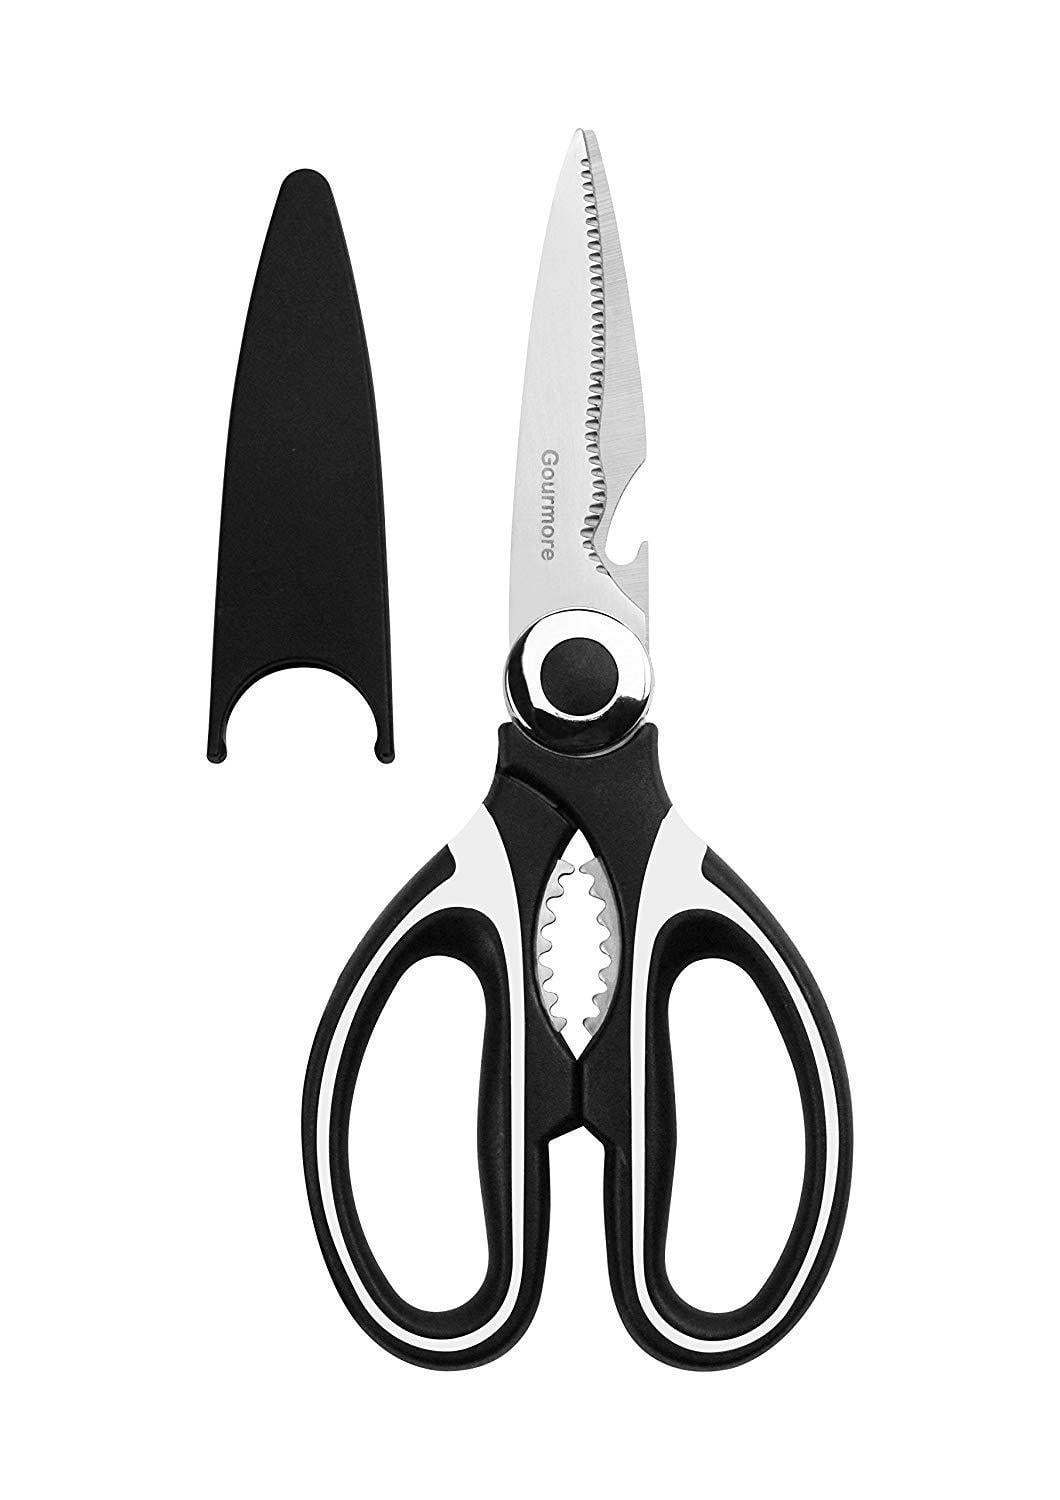 Professional Poultry Shears - Ultra Sharp and Heavy Duty Kitchen Scissors, Size: 9.45 x 2.76 x 0.79, Black